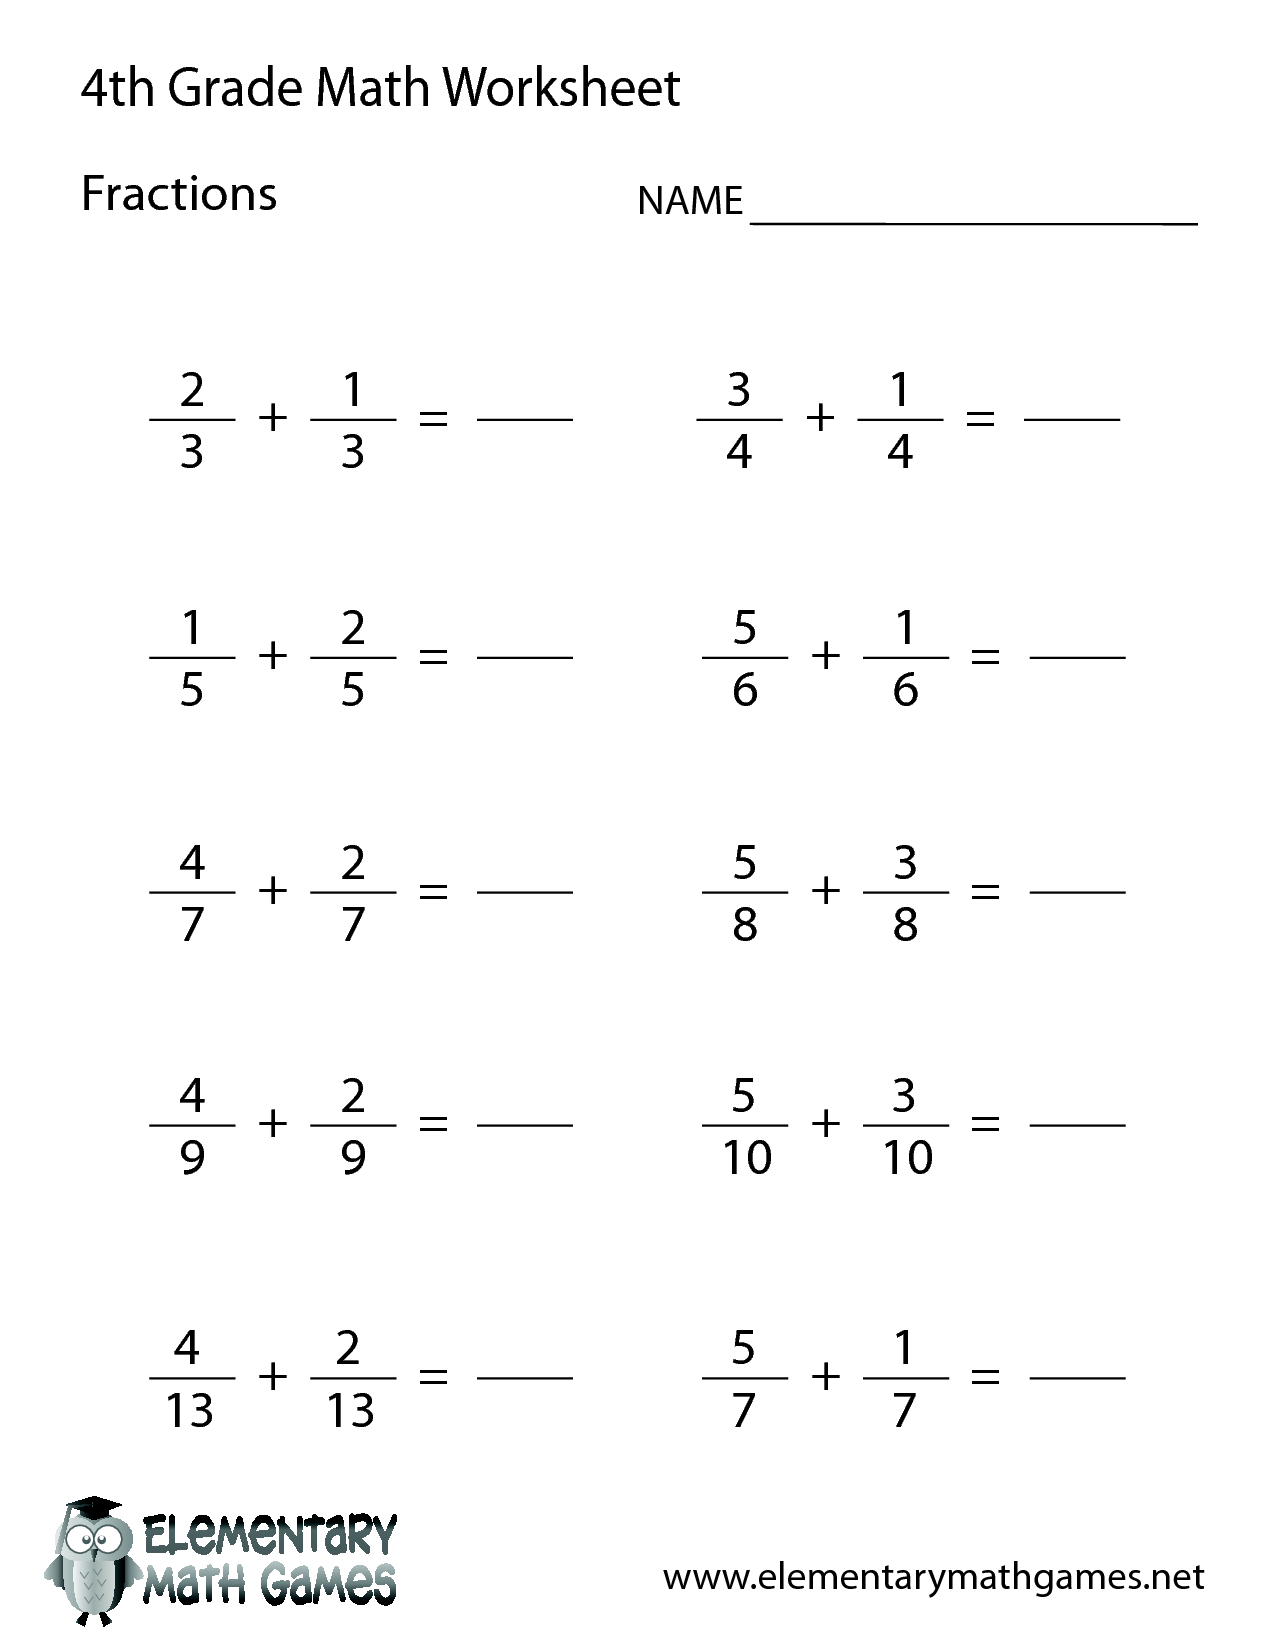  Math Worksheets for 4th Grade